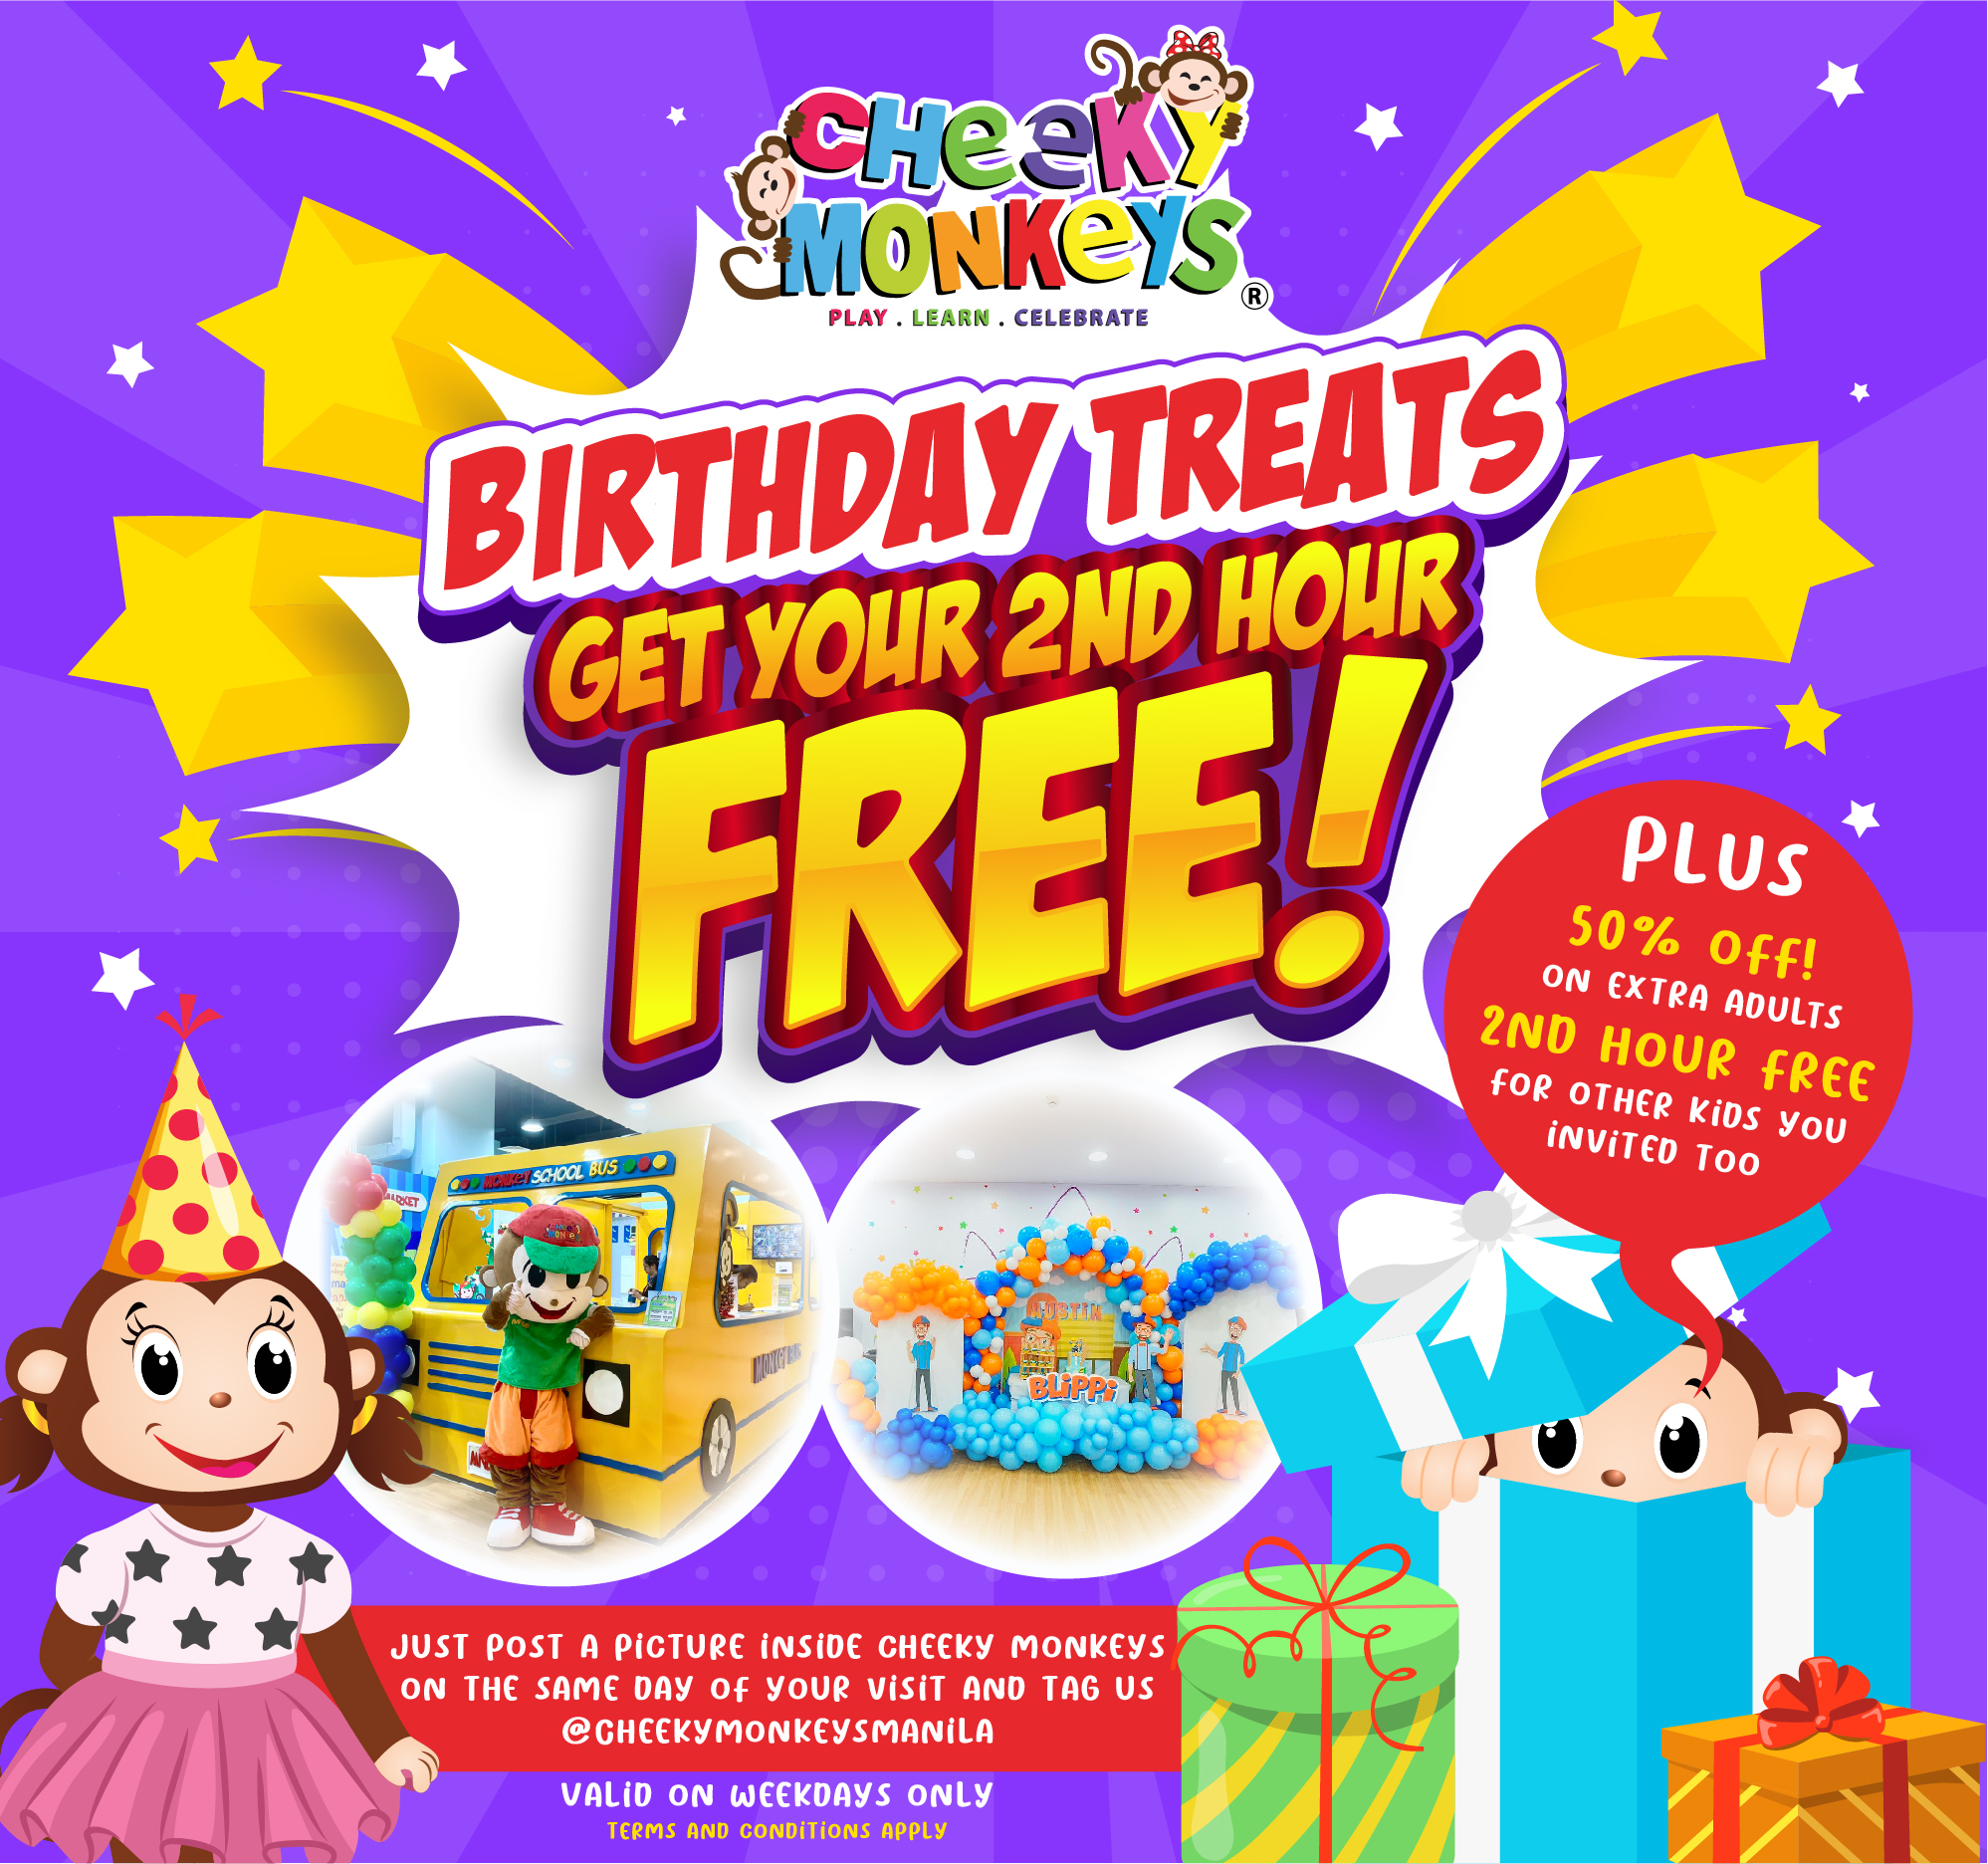 Birthday Treats - Get Your Second Hour Free